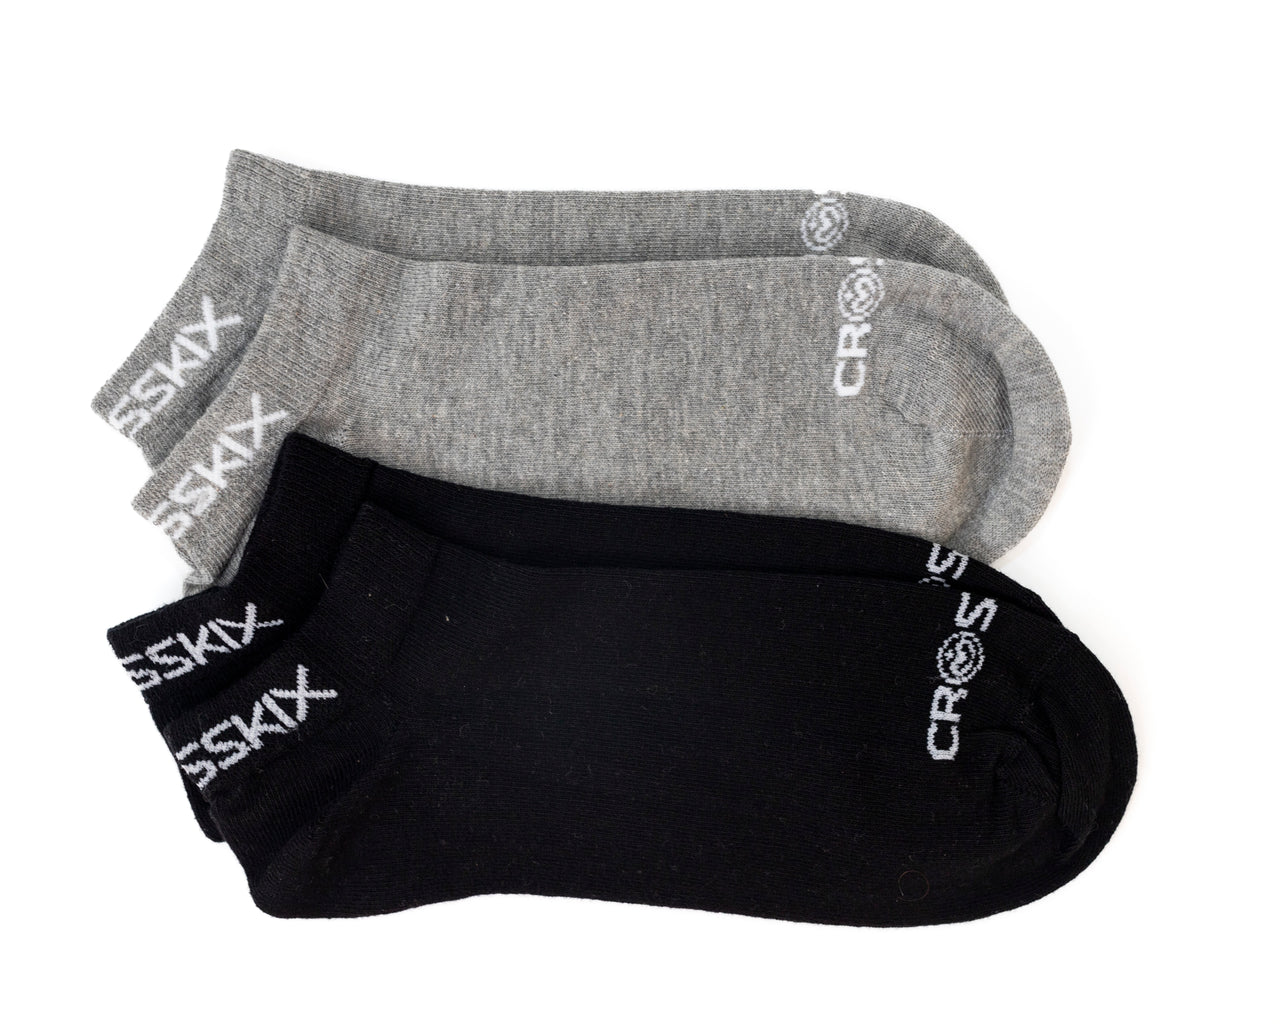 Low Ankle Turkish Cotton Socks for Men 2 Pair Pack - Size 8-12